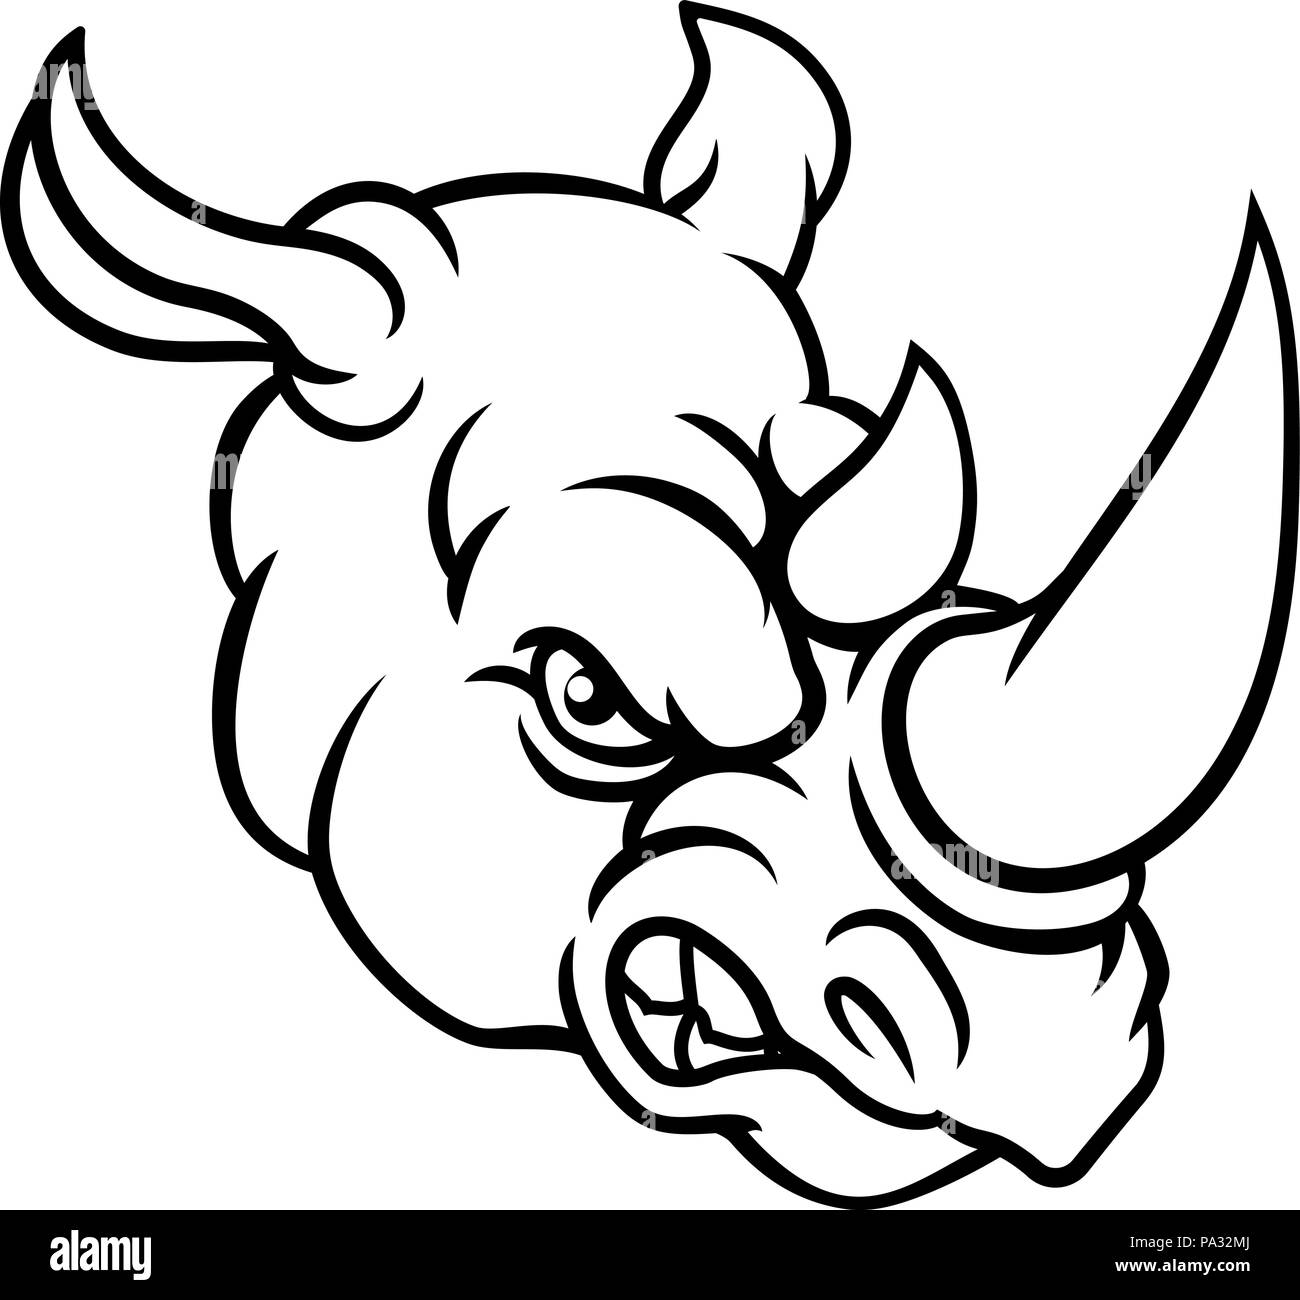 Rhino Mean Angry Sports Mascot Stock Vector